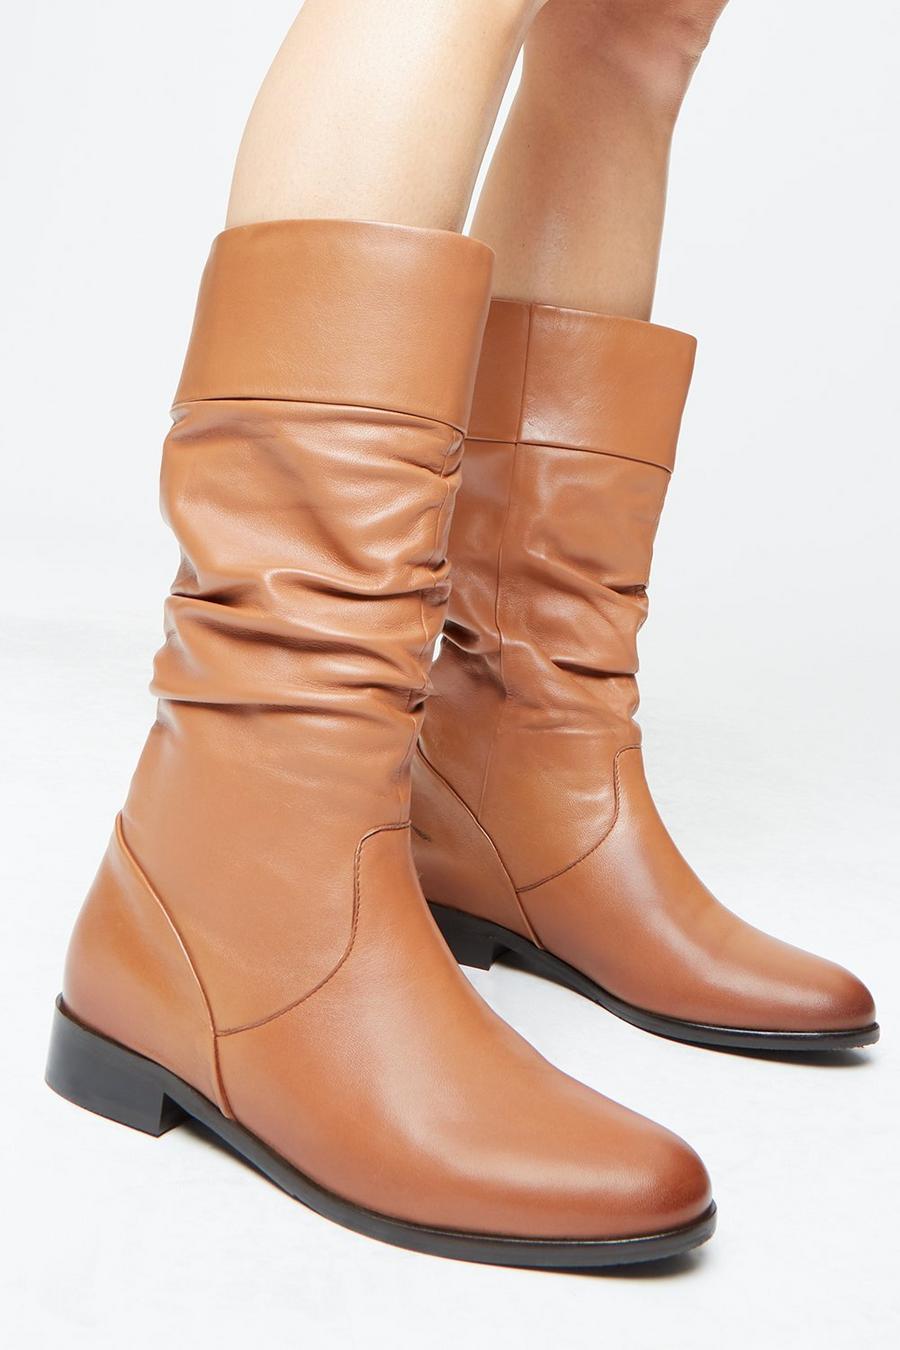 Leather Tiffany Ruched Knee High Boots